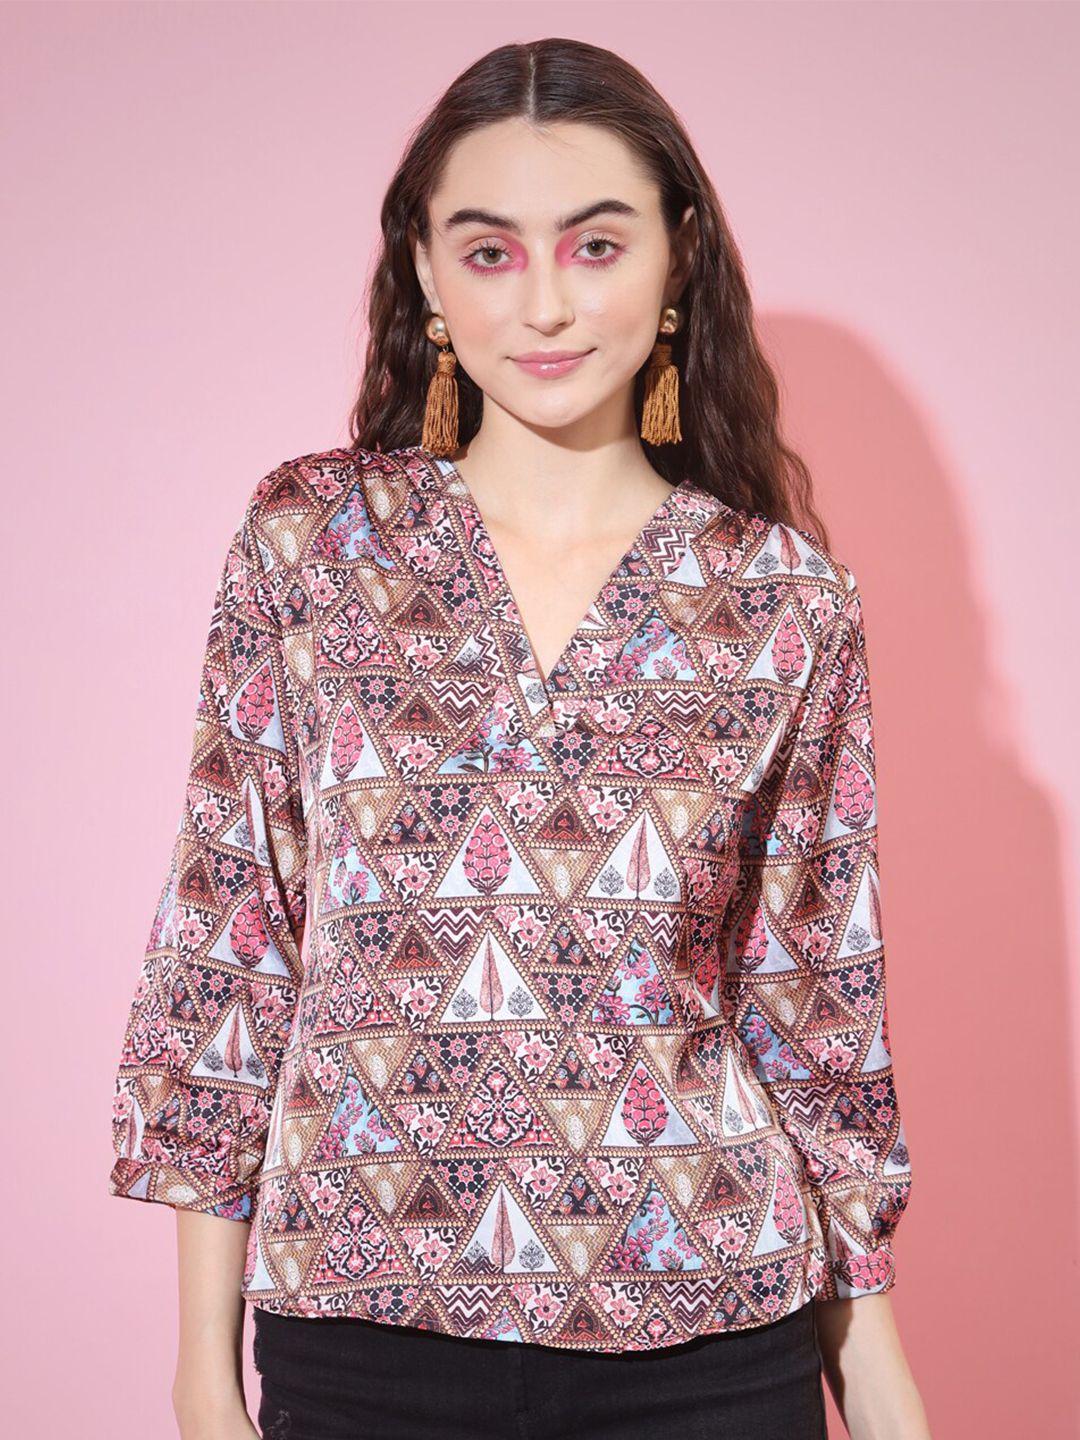 dressberry brown & pink ethnic motifs printed satin shirt style top